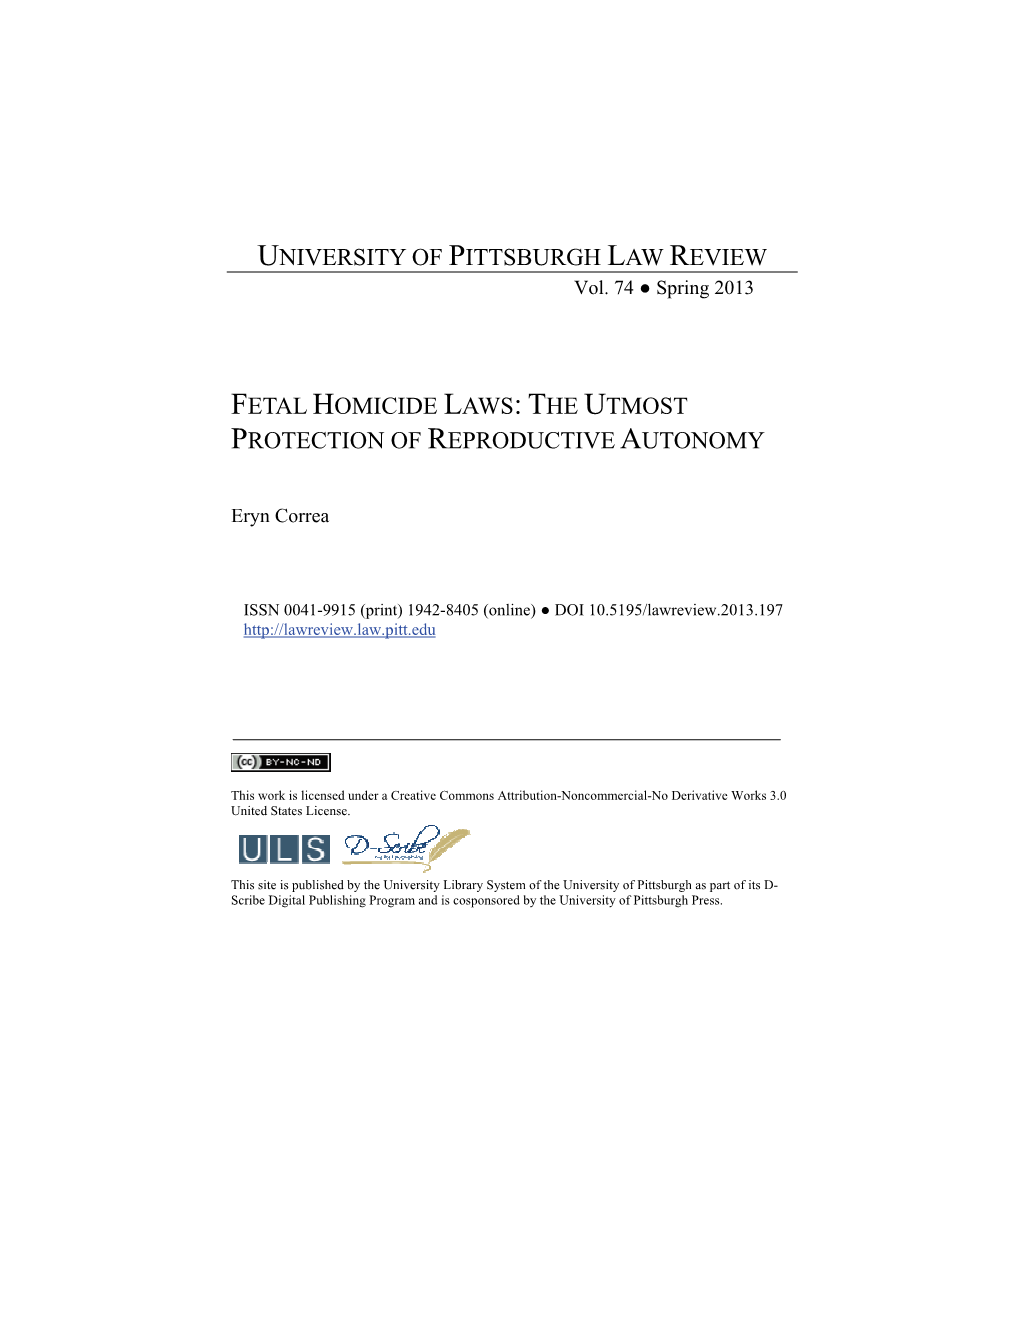 Fetal Homicide Laws: the Utmost Protection of Reproductive Autonomy University of Pittsburgh Law Review